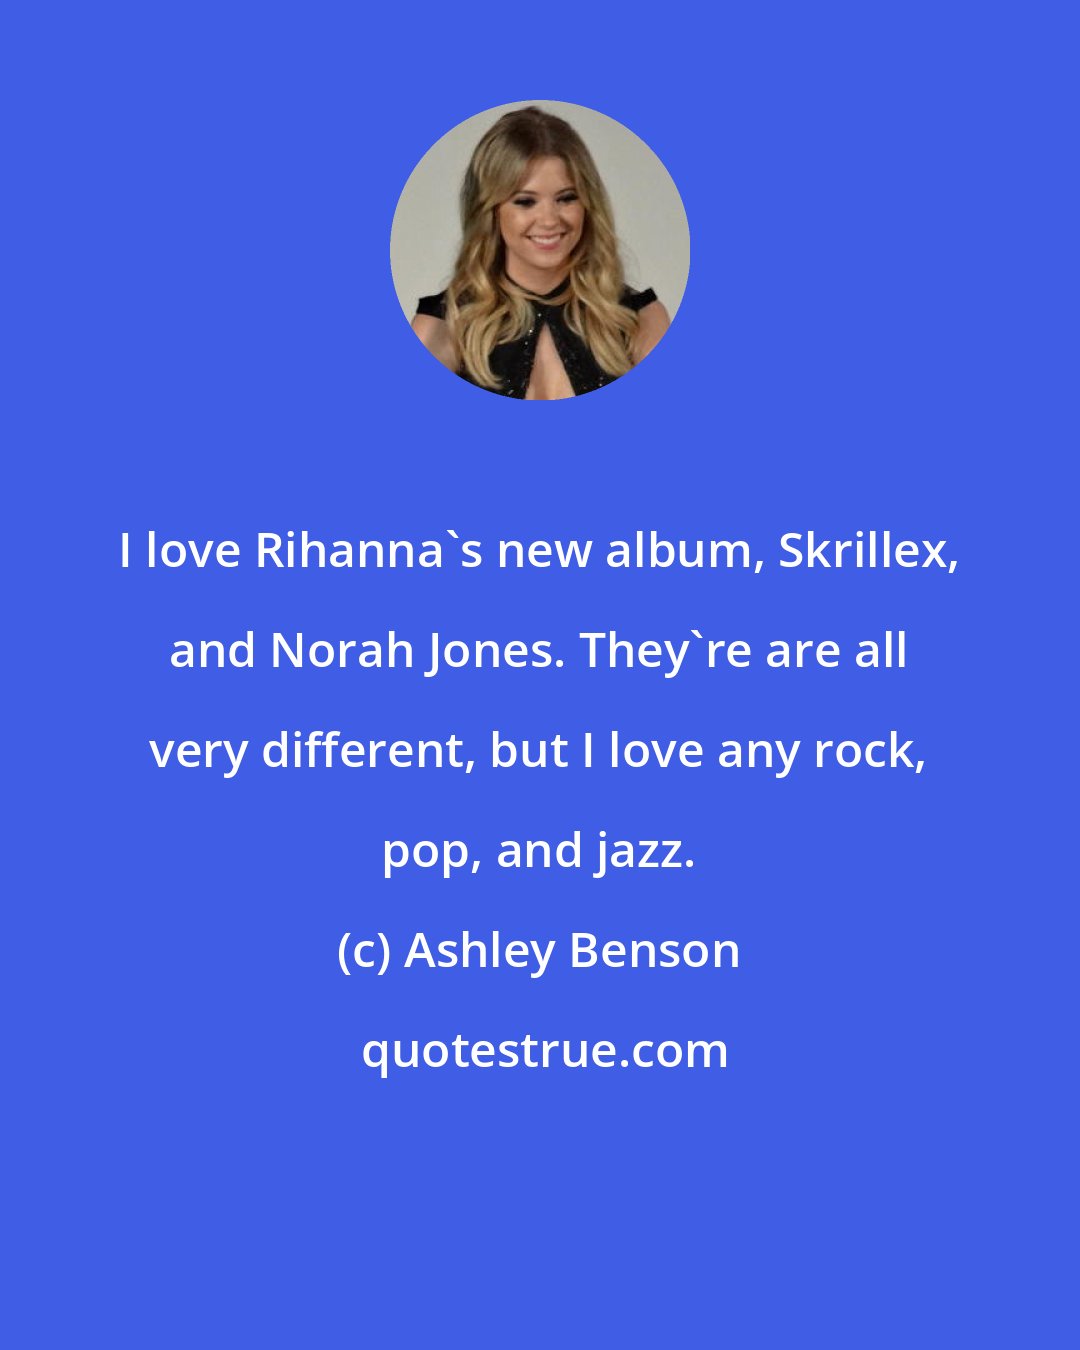 Ashley Benson: I love Rihanna's new album, Skrillex, and Norah Jones. They're are all very different, but I love any rock, pop, and jazz.